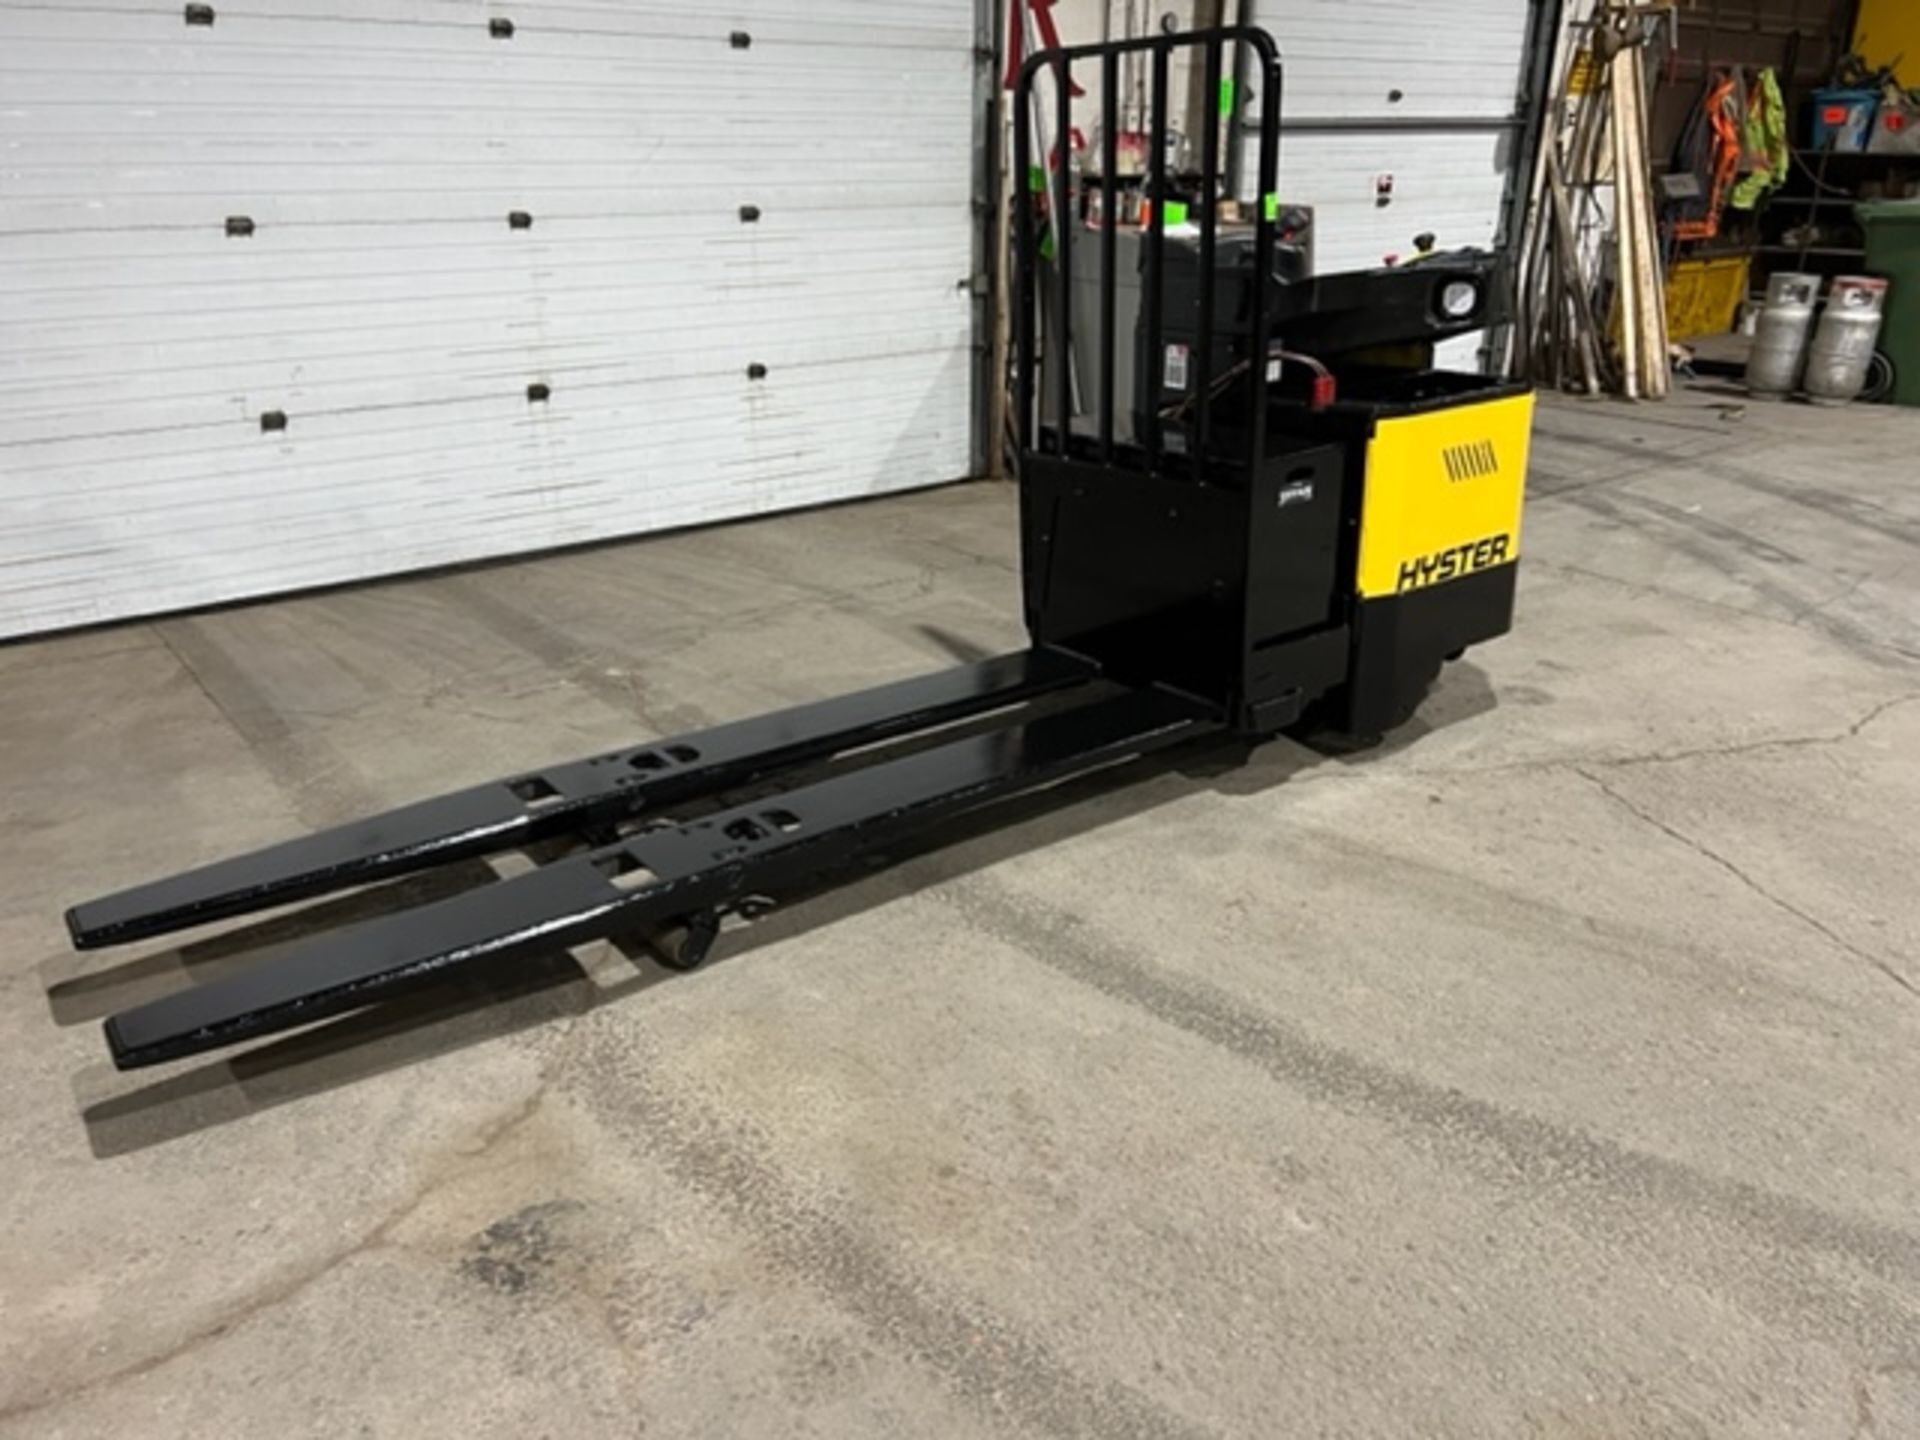 NICE 2015 Hyster Ride-On END RIDER Powered Pallet Truck 8' Long Forks 8000lbs capacity 24V NICE - Image 3 of 4